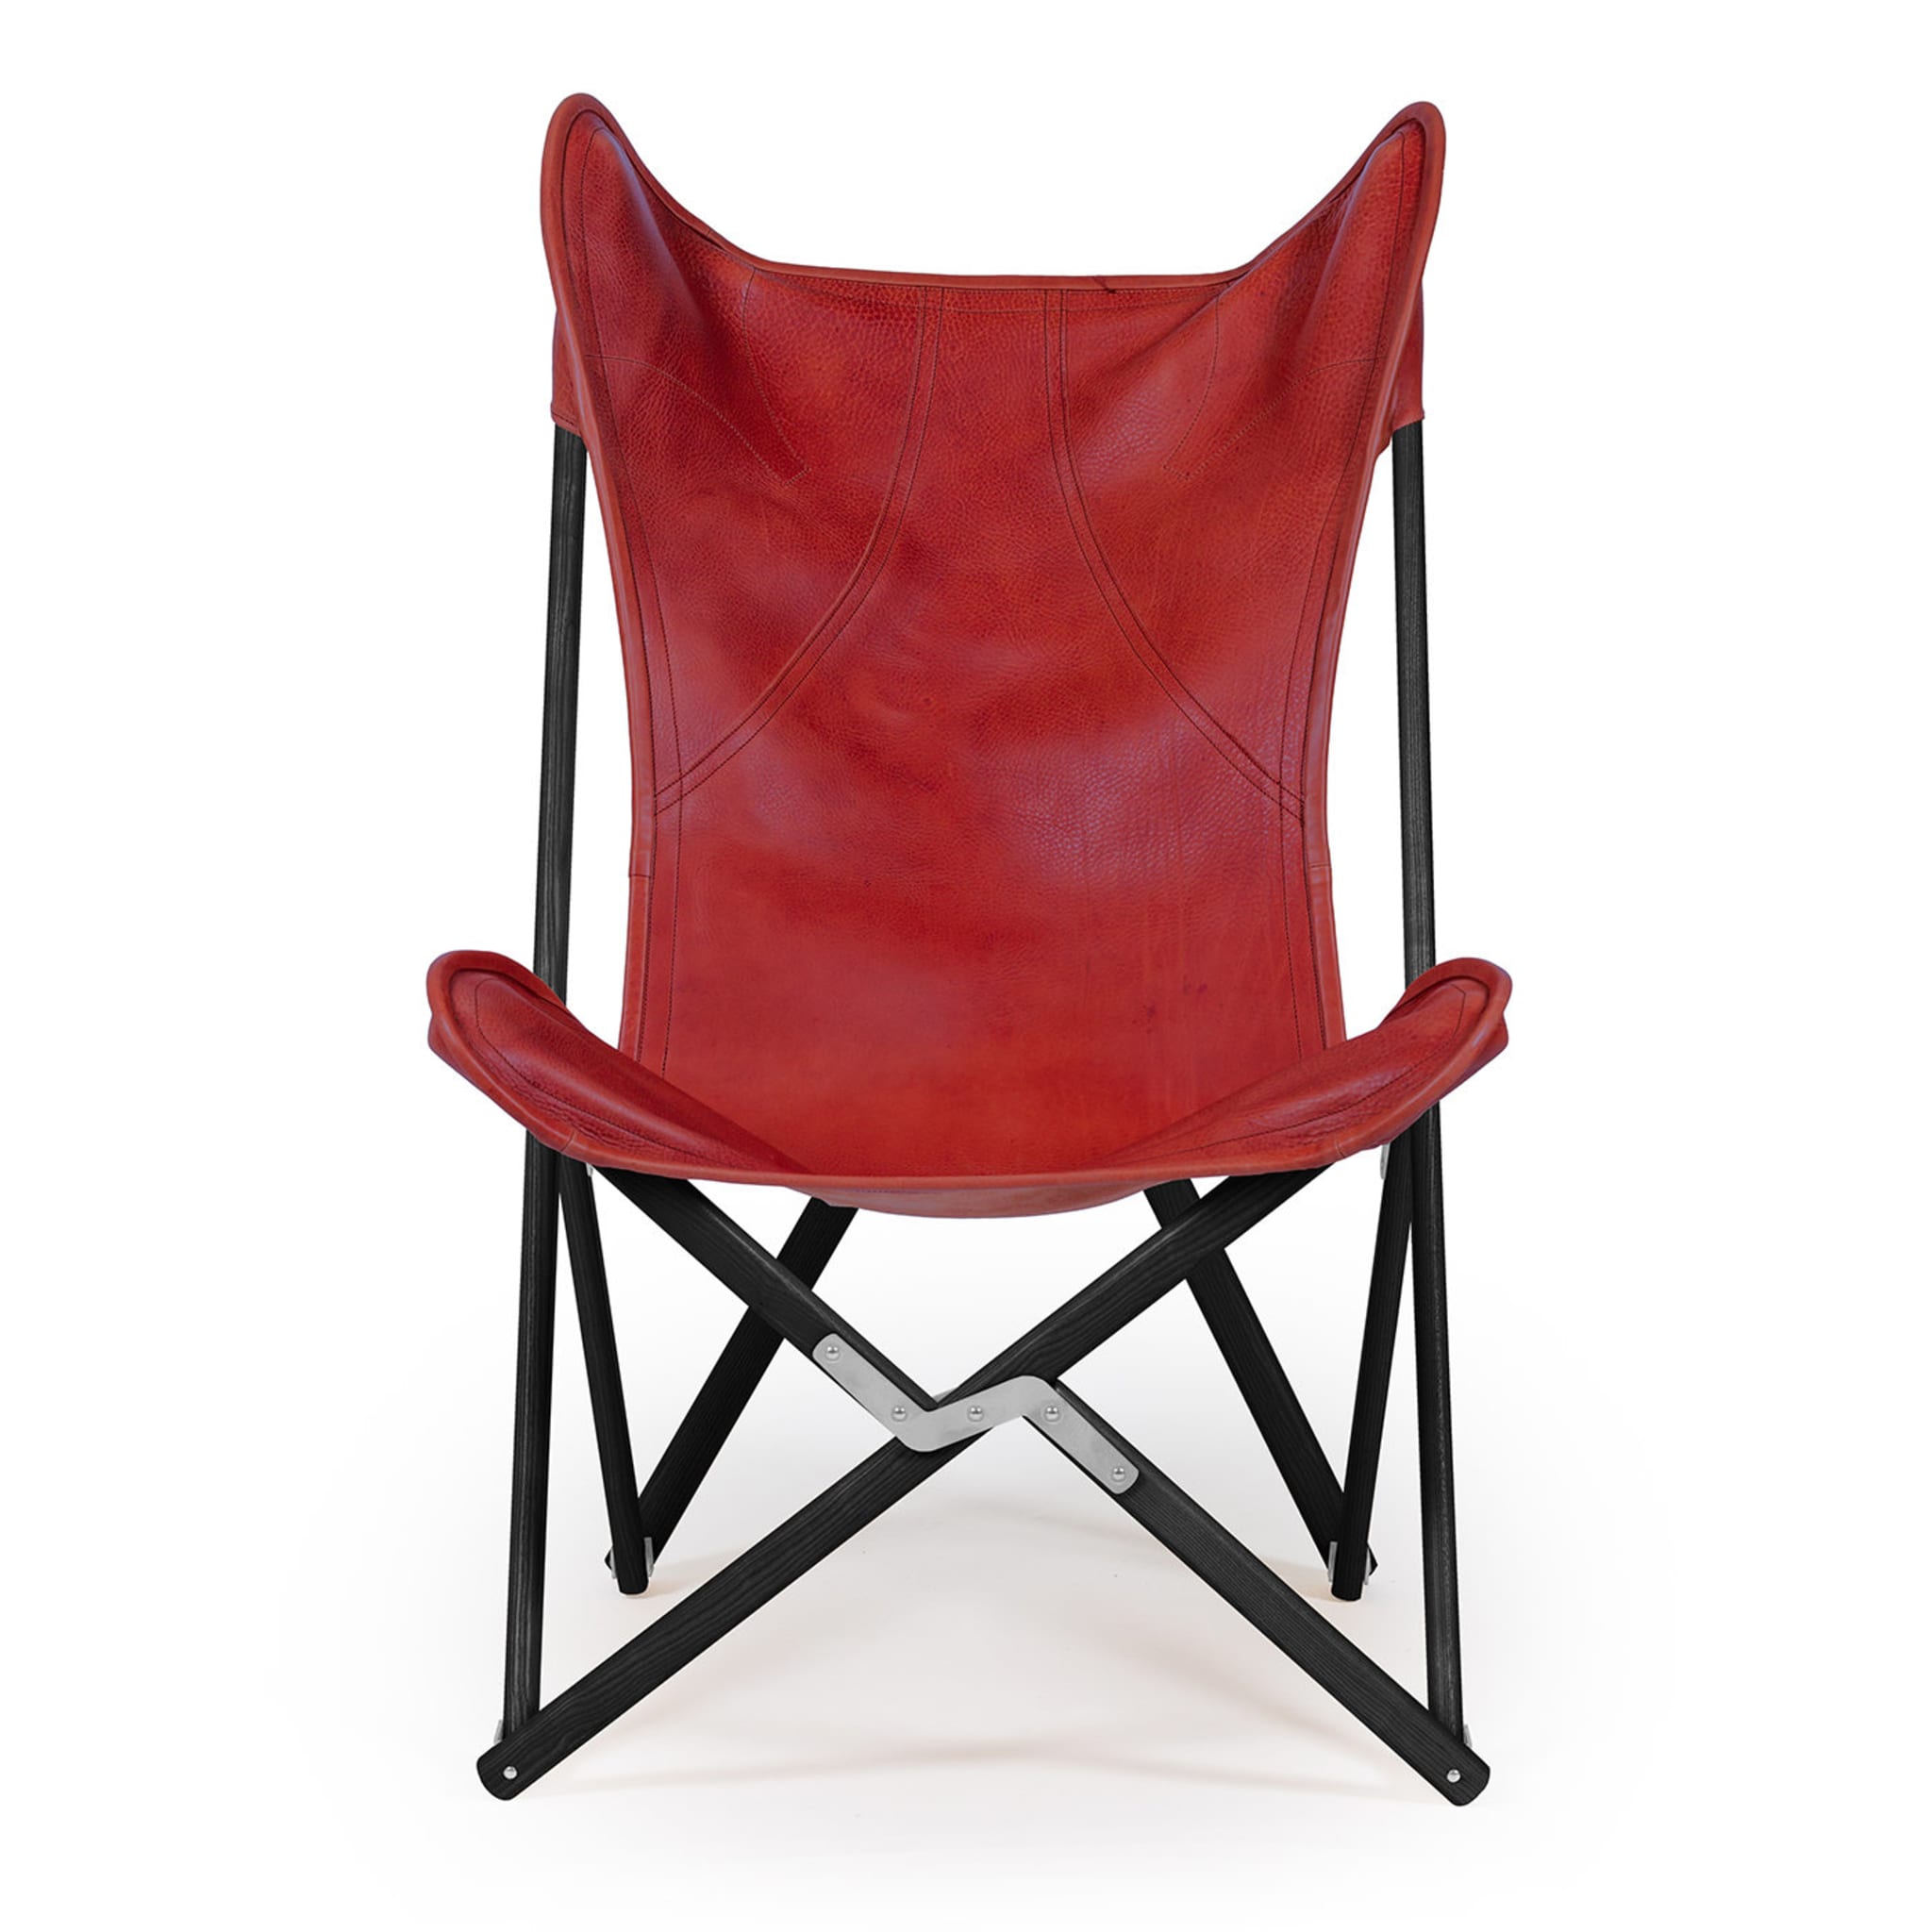 Tripolina Armchair in Red Leather - Main view